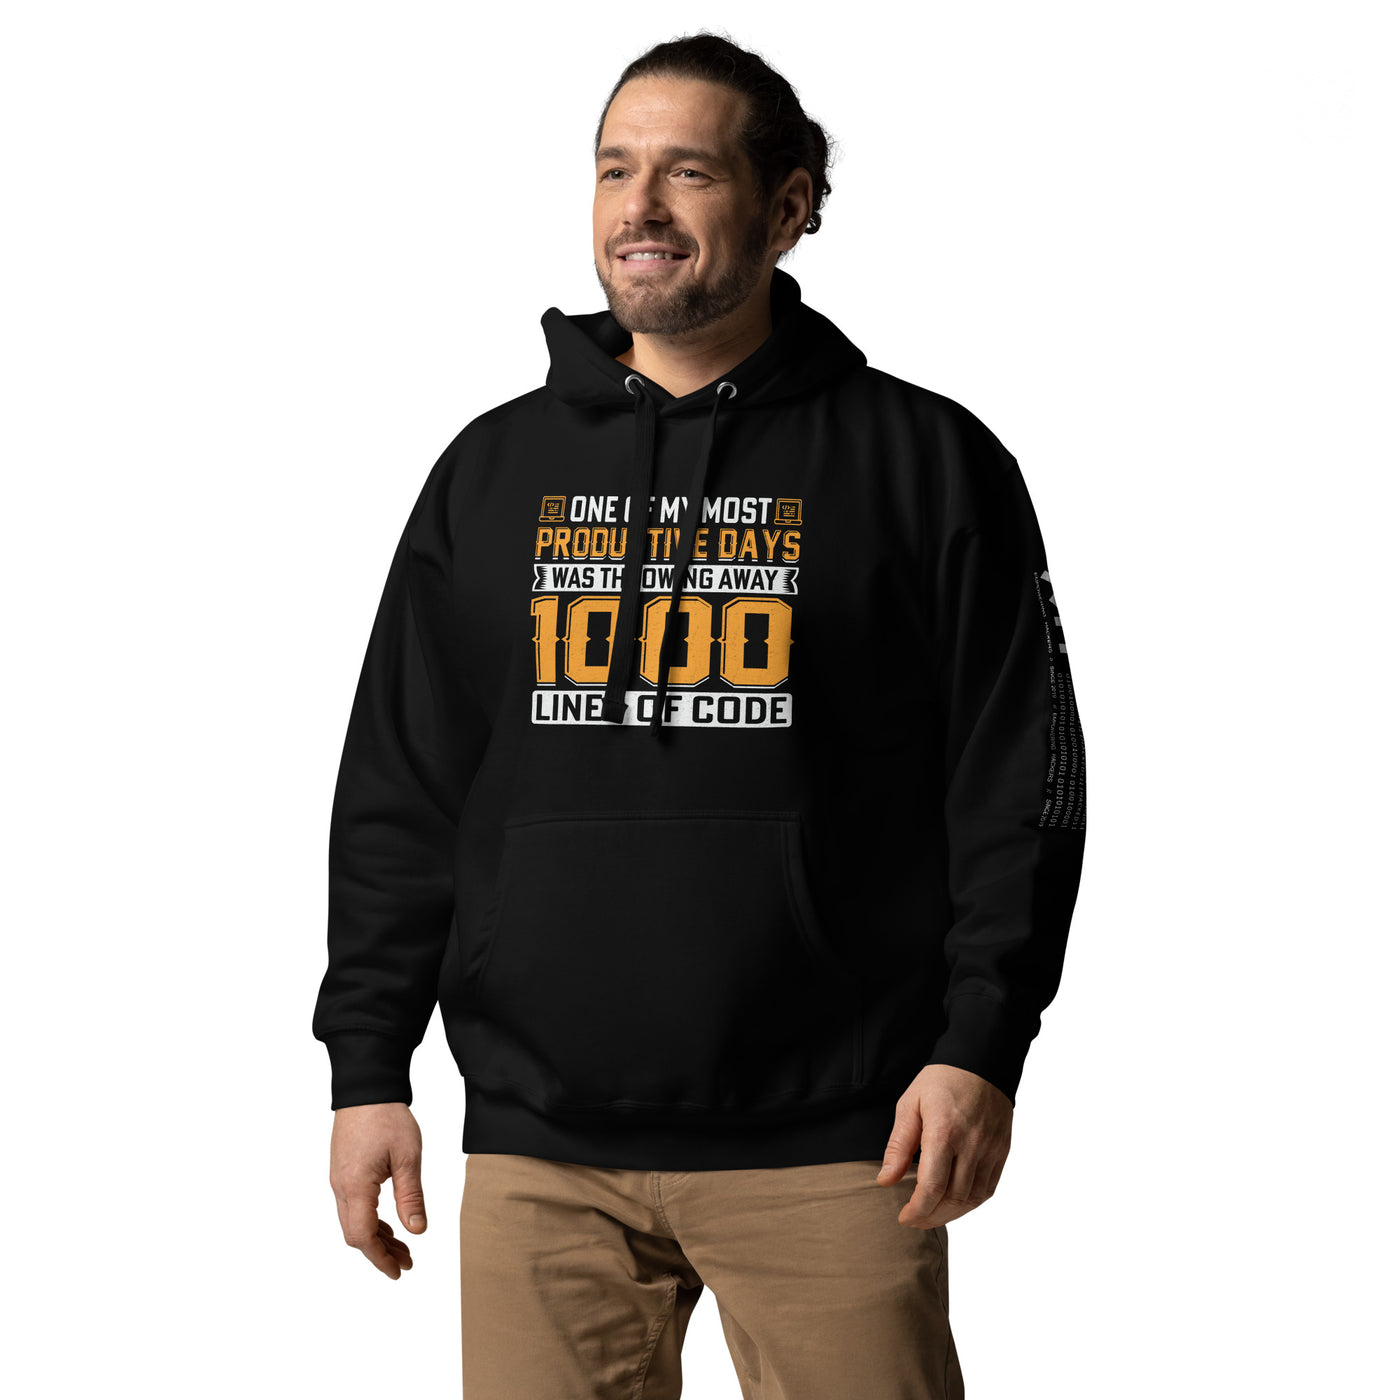 One of My Most Productive Days was throwing away 1000 lines of Code Unisex Hoodie